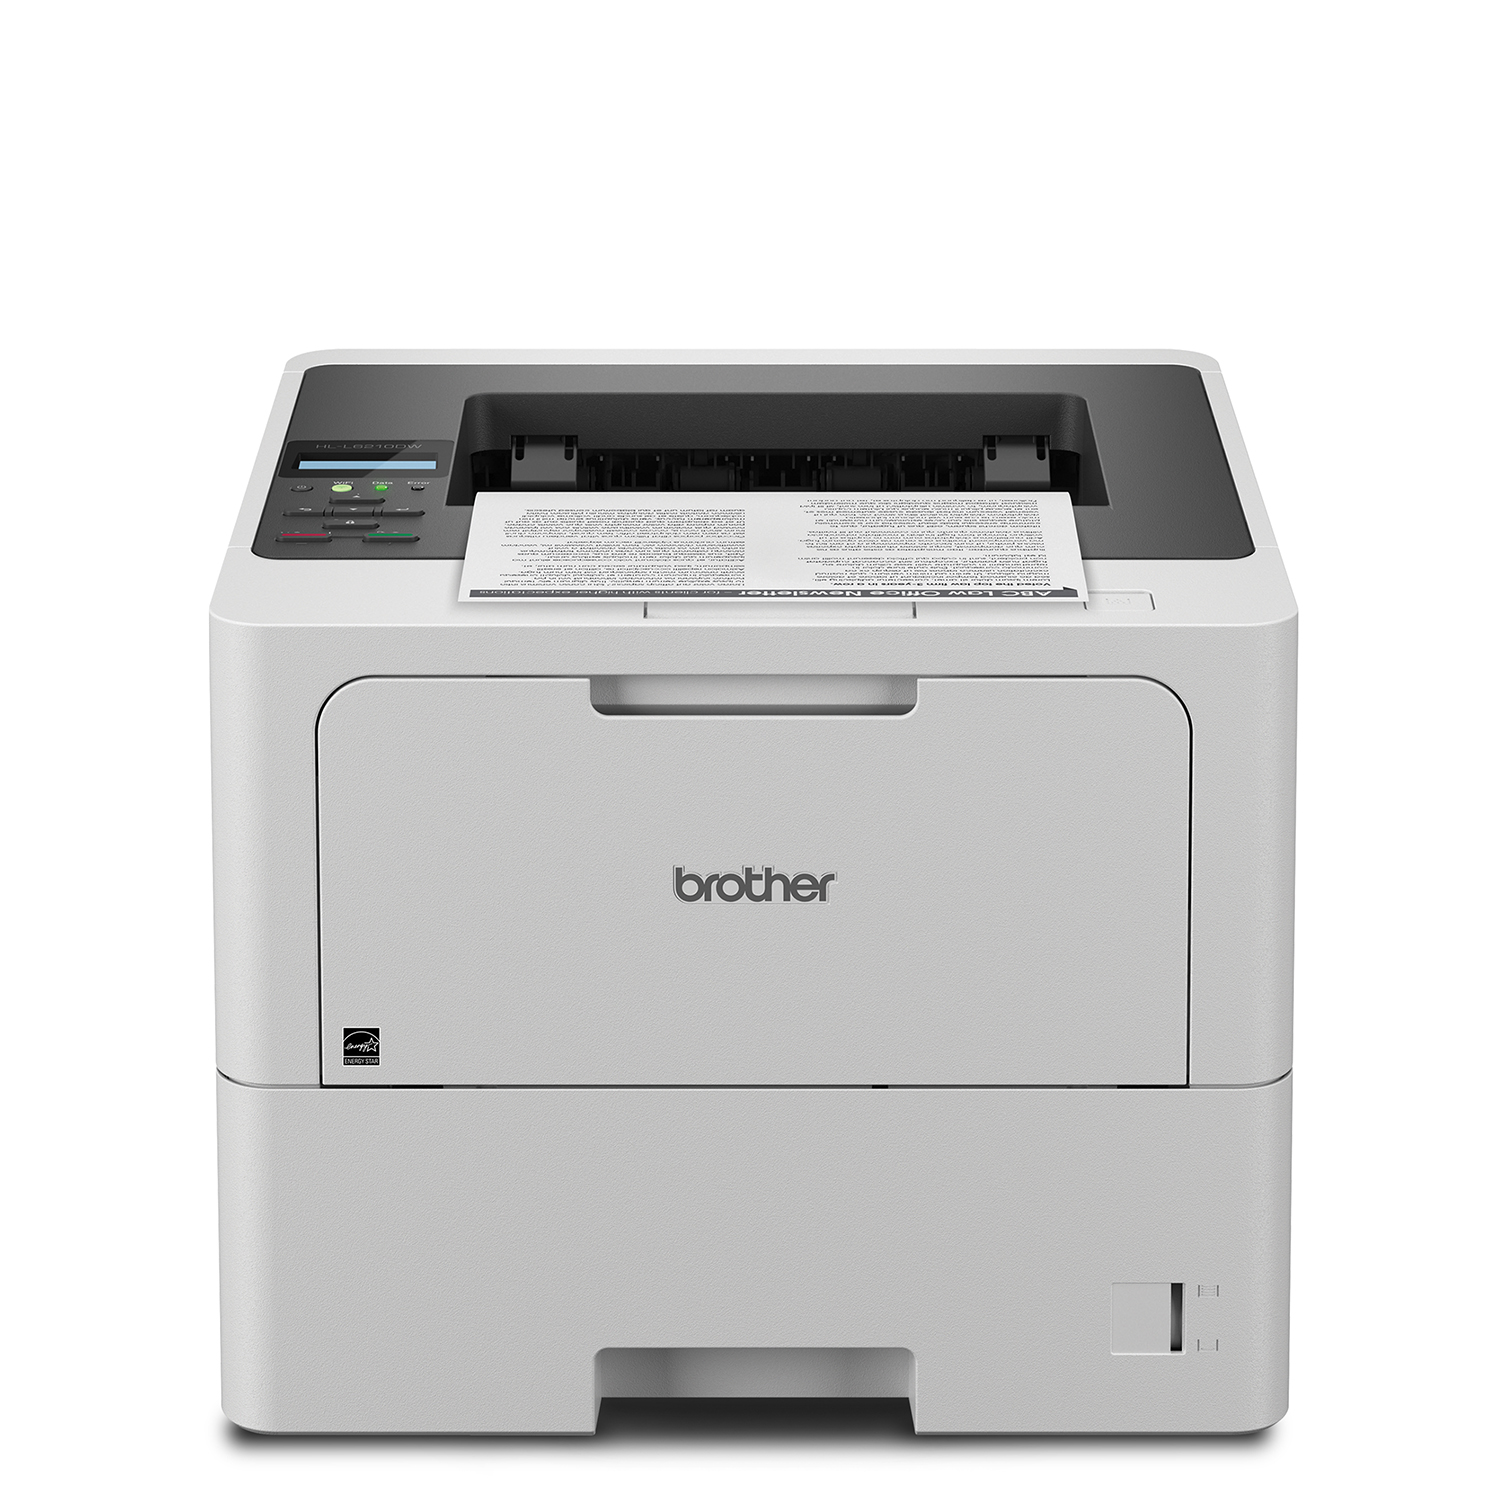 

Brother Business Monochrome Laser Printer with Large Paper Capacity, Wireless Networking, and Duplex Printing